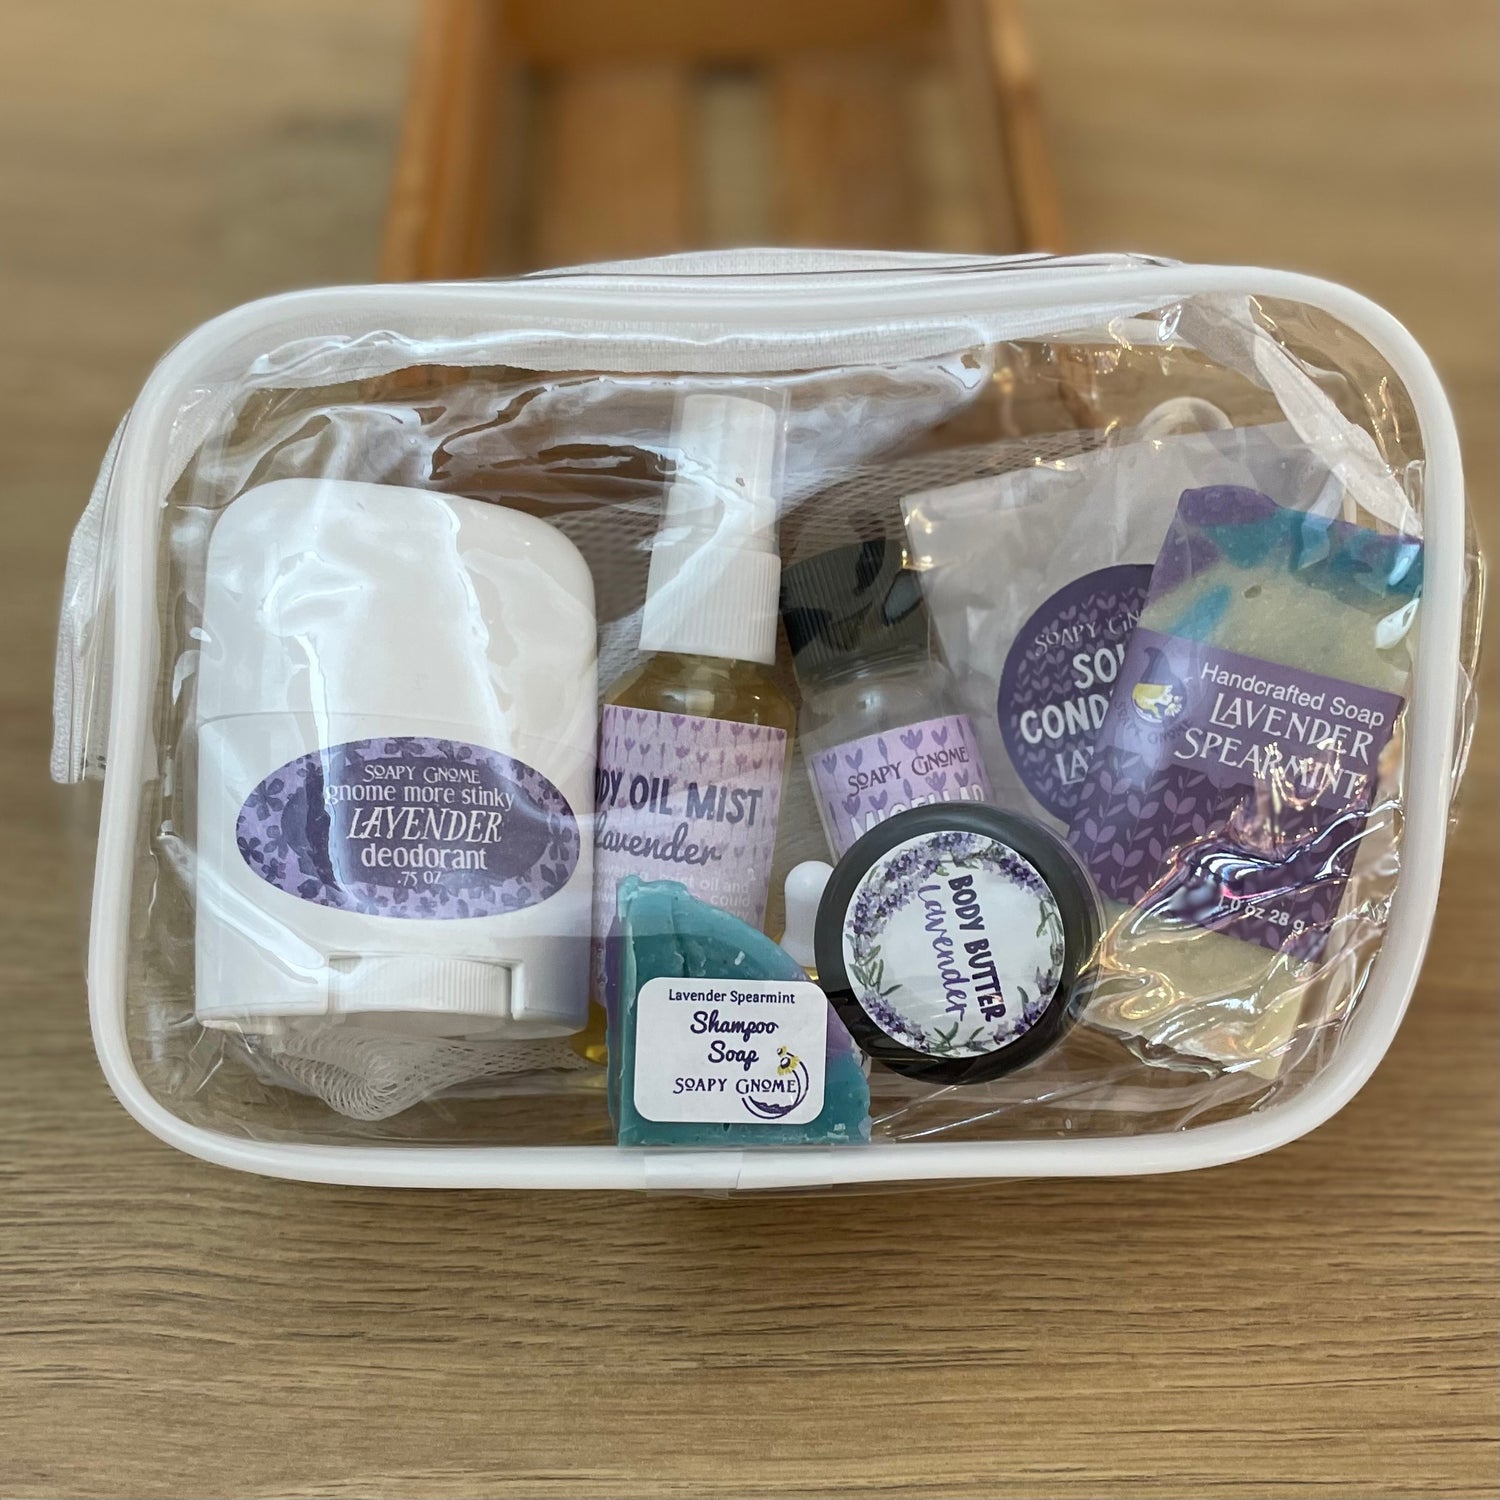 Soapy Gnome Travel Bags